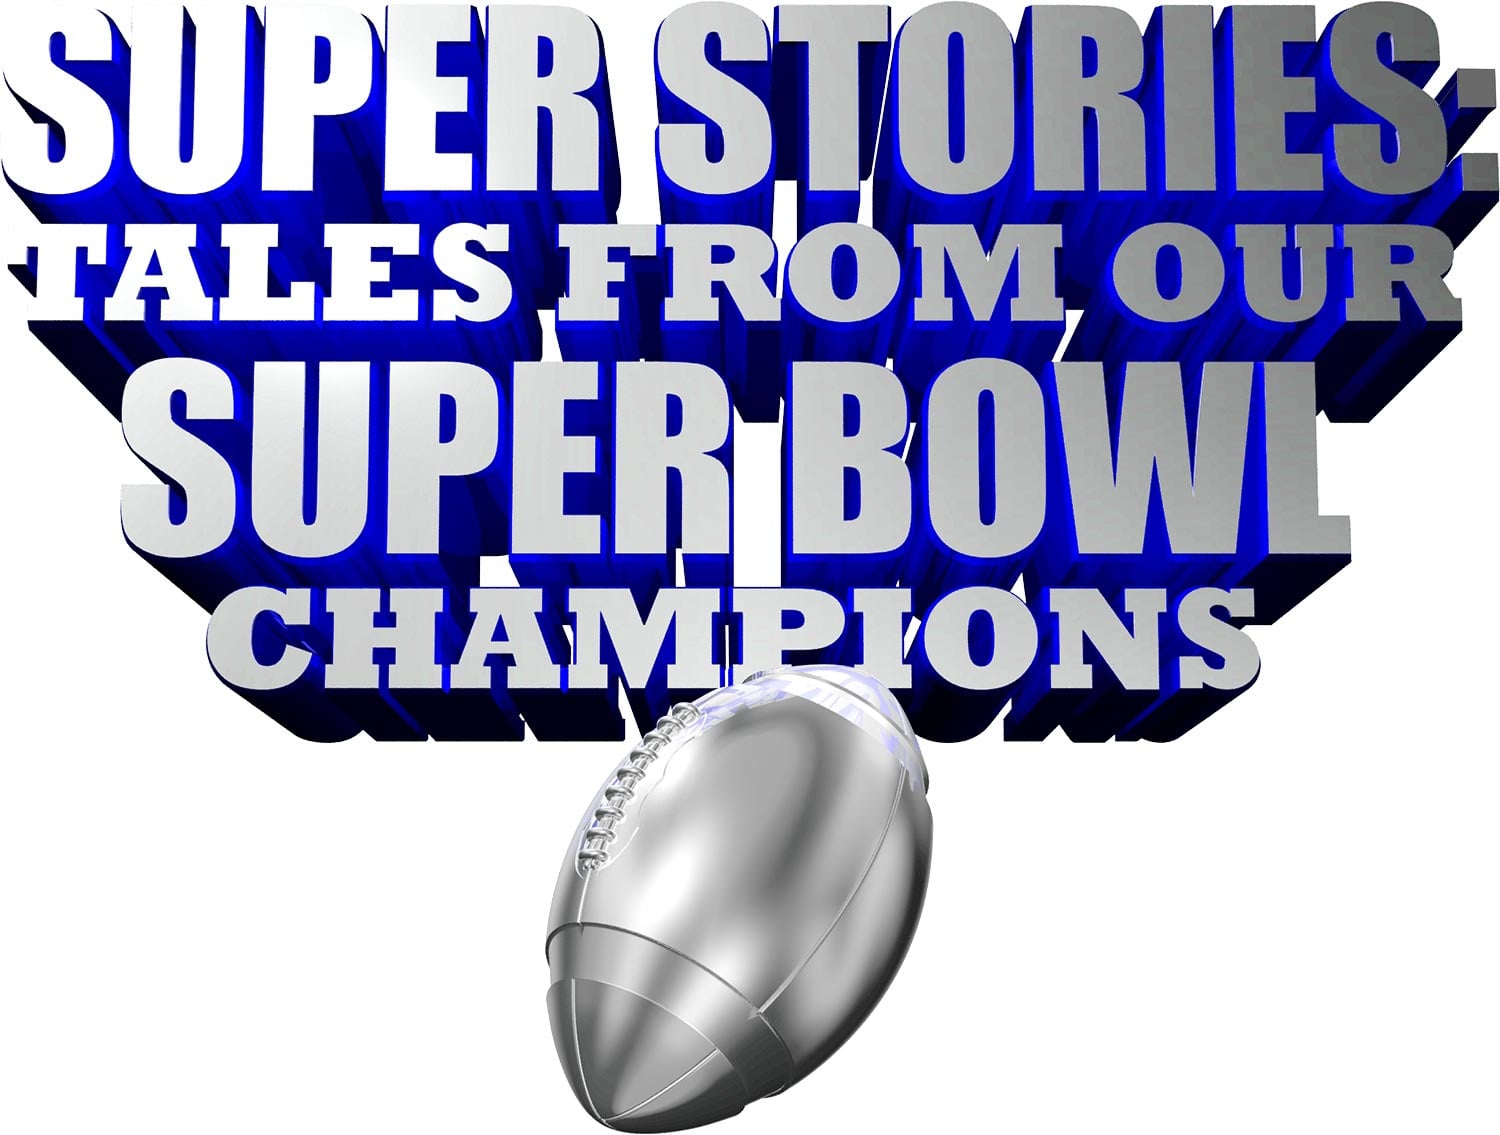 Super Stories: Tales from our Super Bowl Champions with Jerry Kramer and Mark Rypien